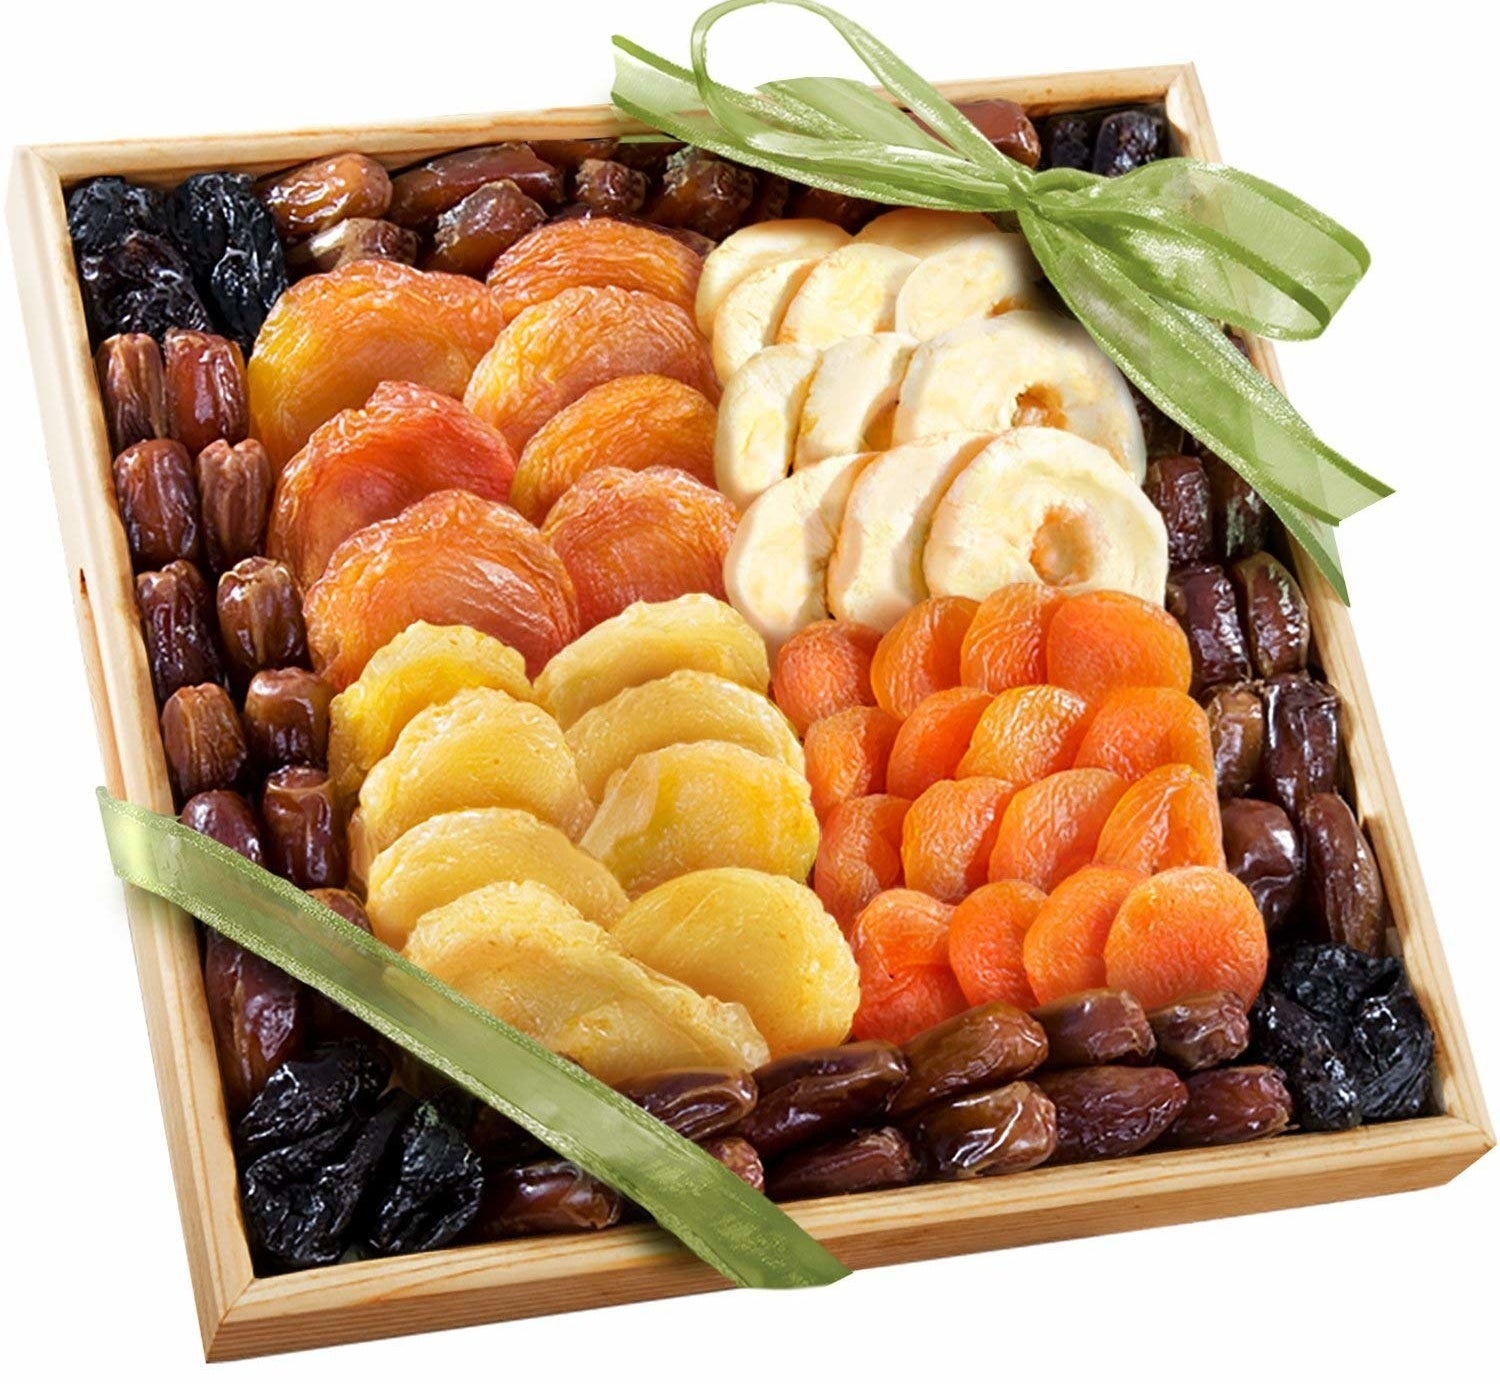 assorted dried fruit like apricots and prunes